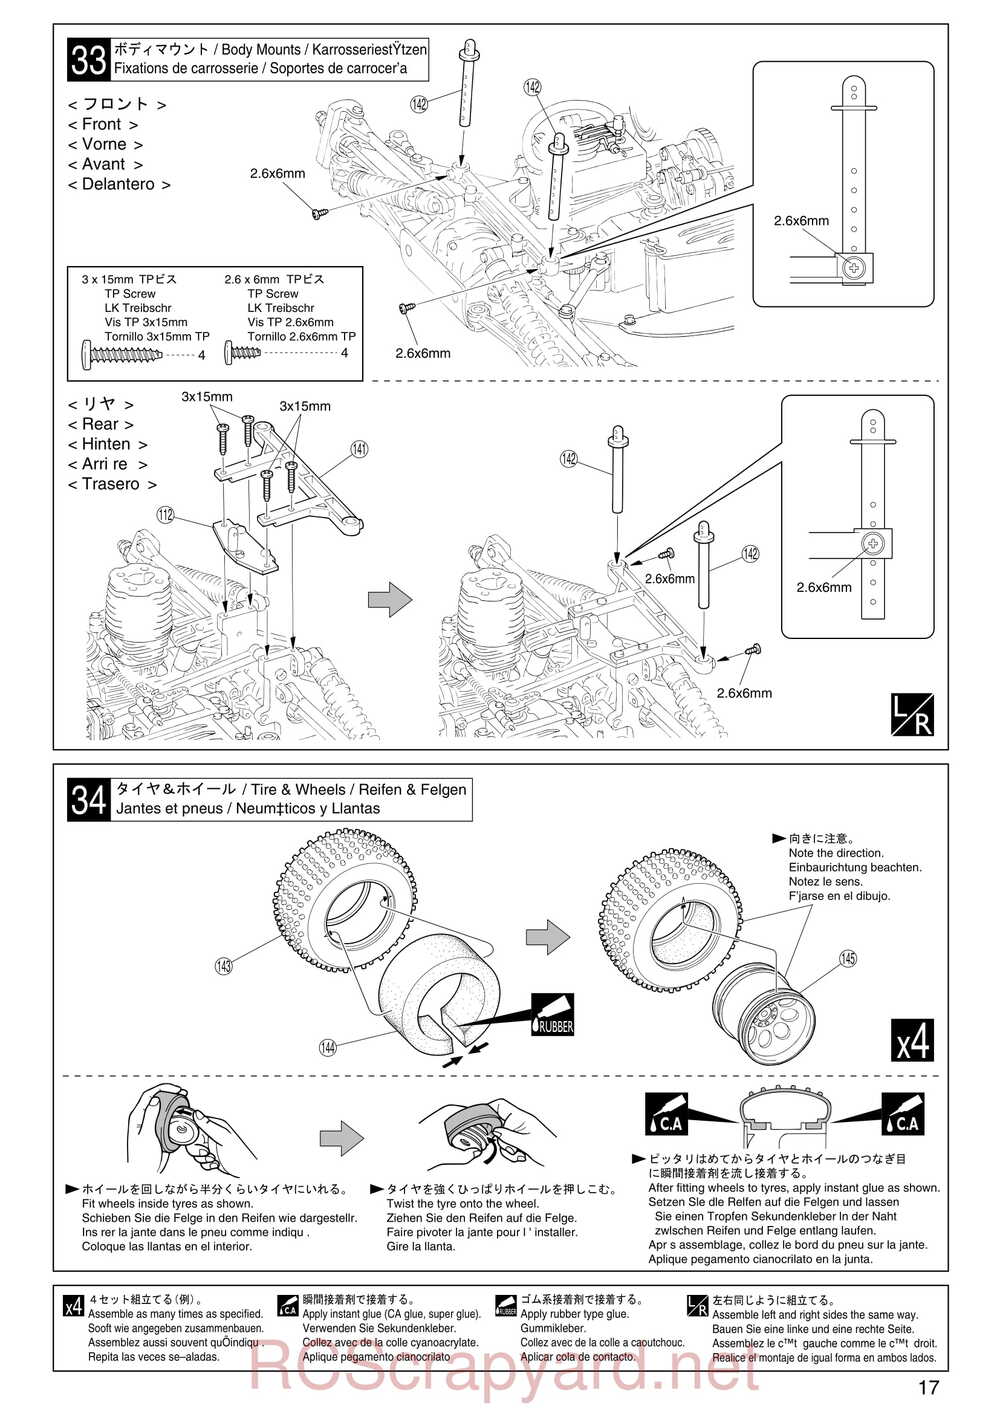 Kyosho - 31095 - TR-15 Stadium-Force - Manual - Page 17